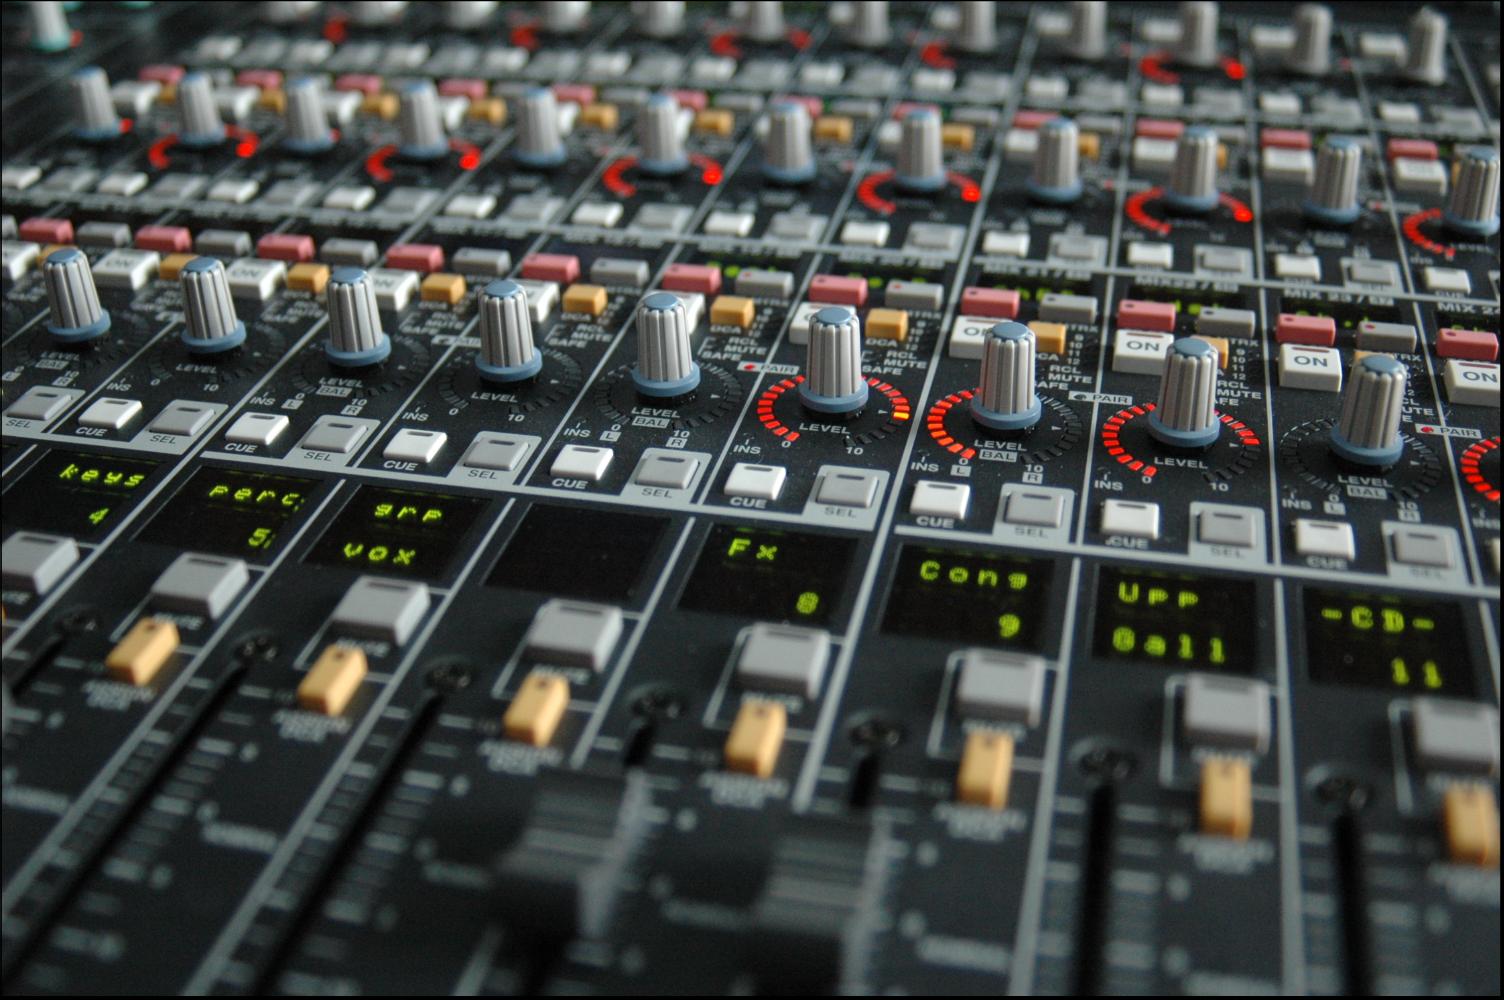 Digital mixing desk at Whitewell